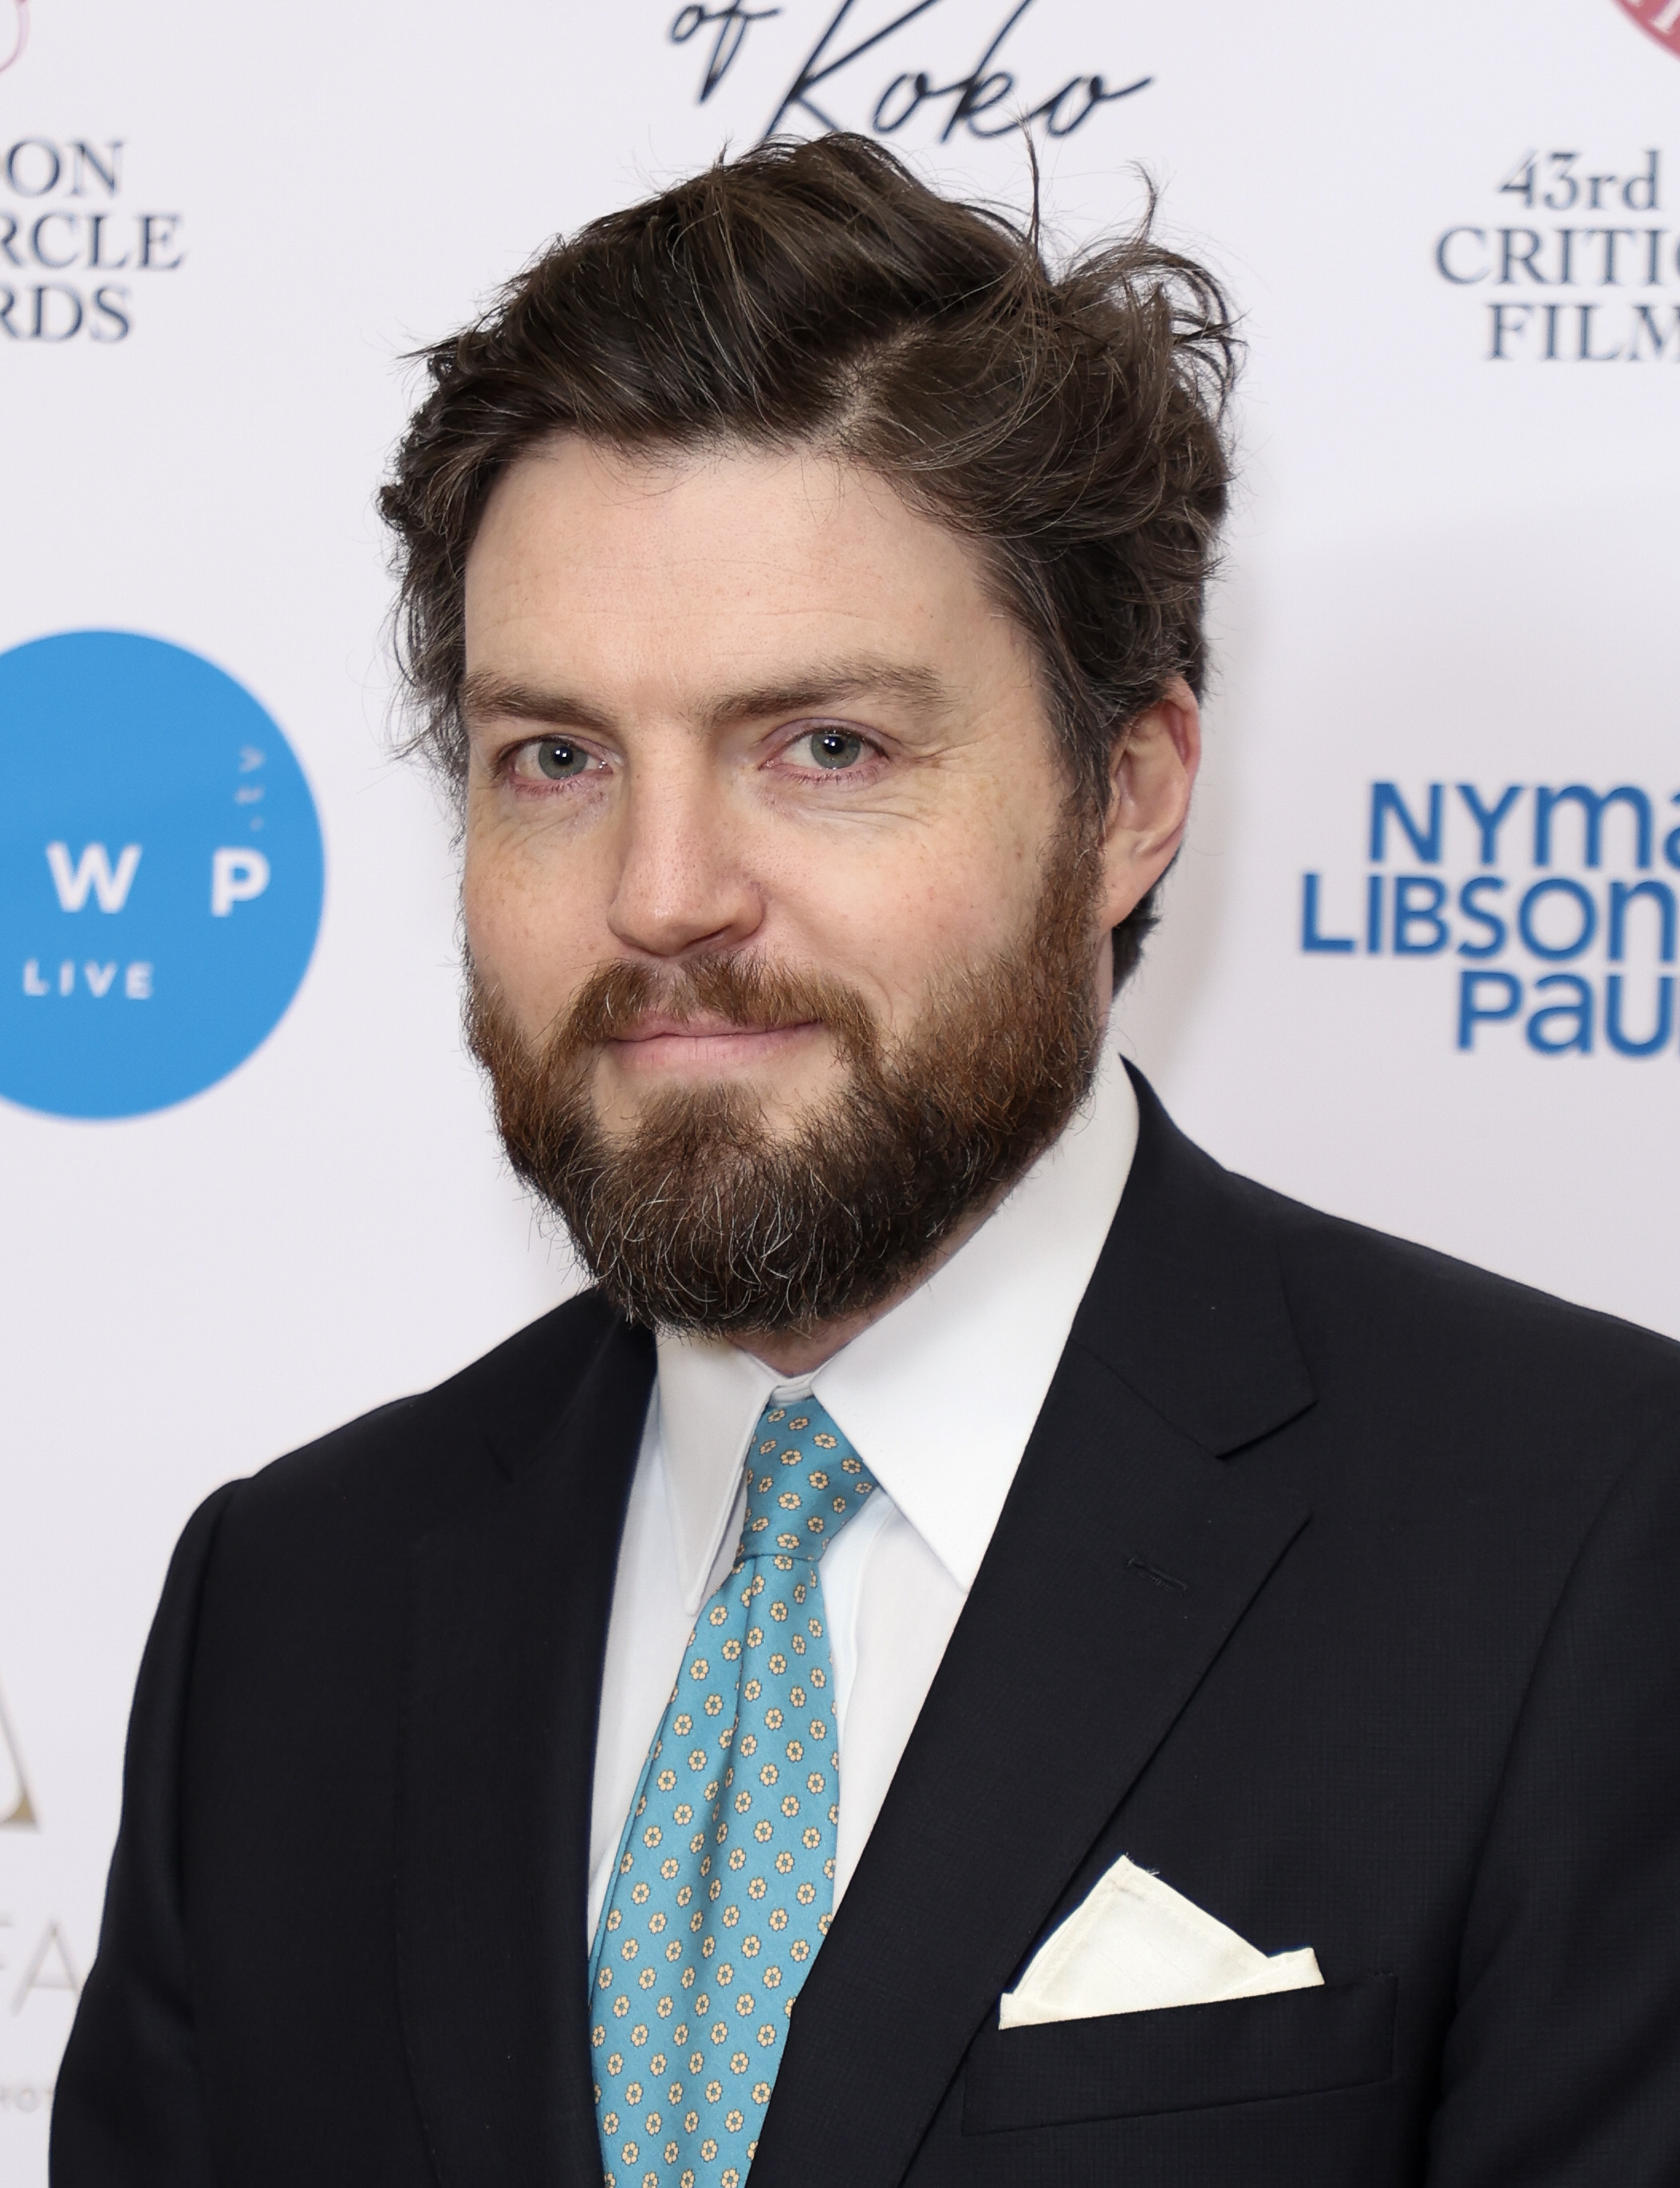 Does Tom Burke Have a Wife? The Actor Is Not Married, Yet He May Not Be